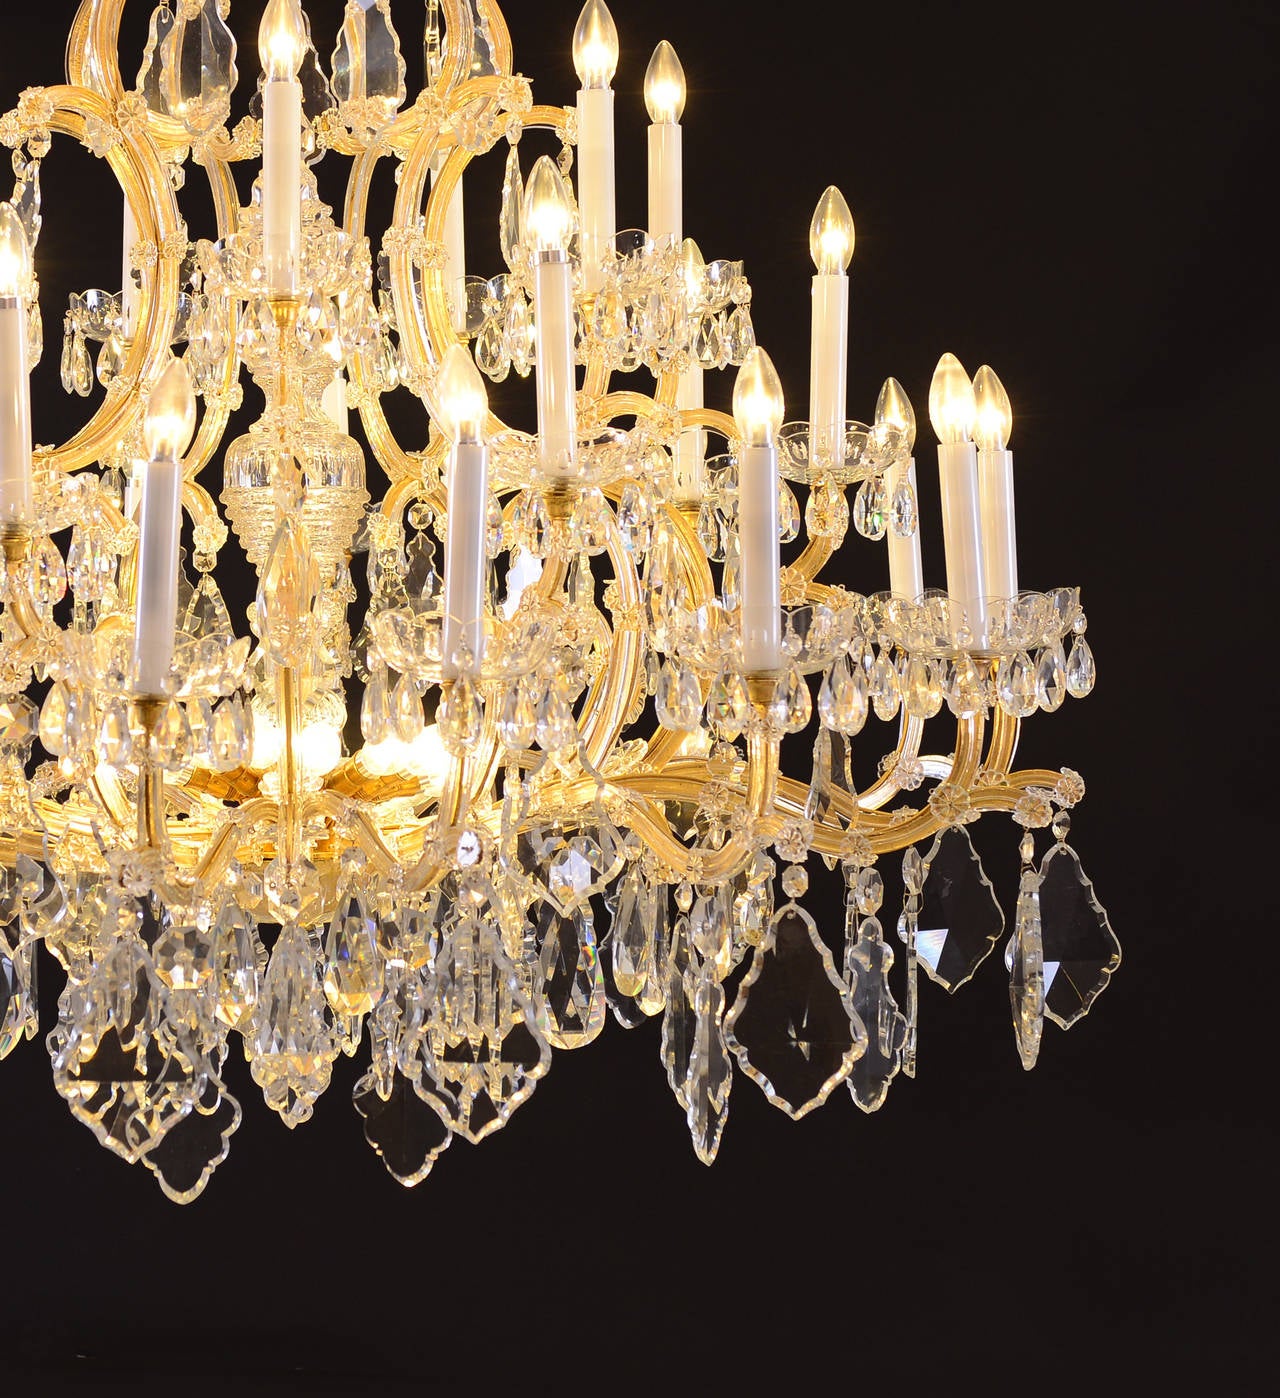 Hand-Crafted Original Large Lobmeyr, Maria Theresien Style Parlor Chandelier, 1910/20